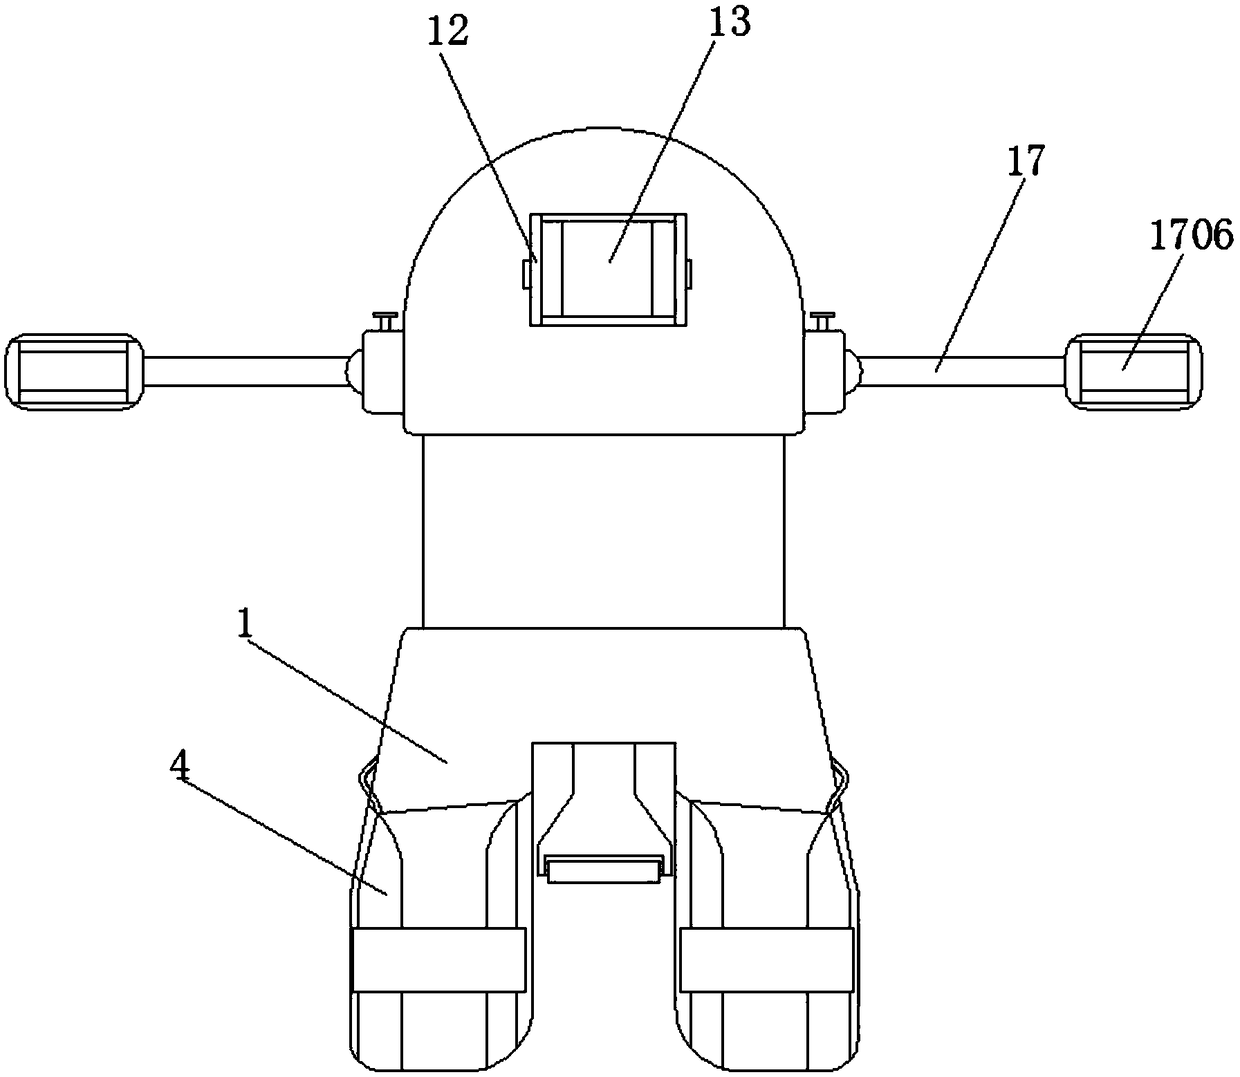 Fixing device for constraining body position of cerebral palsy child